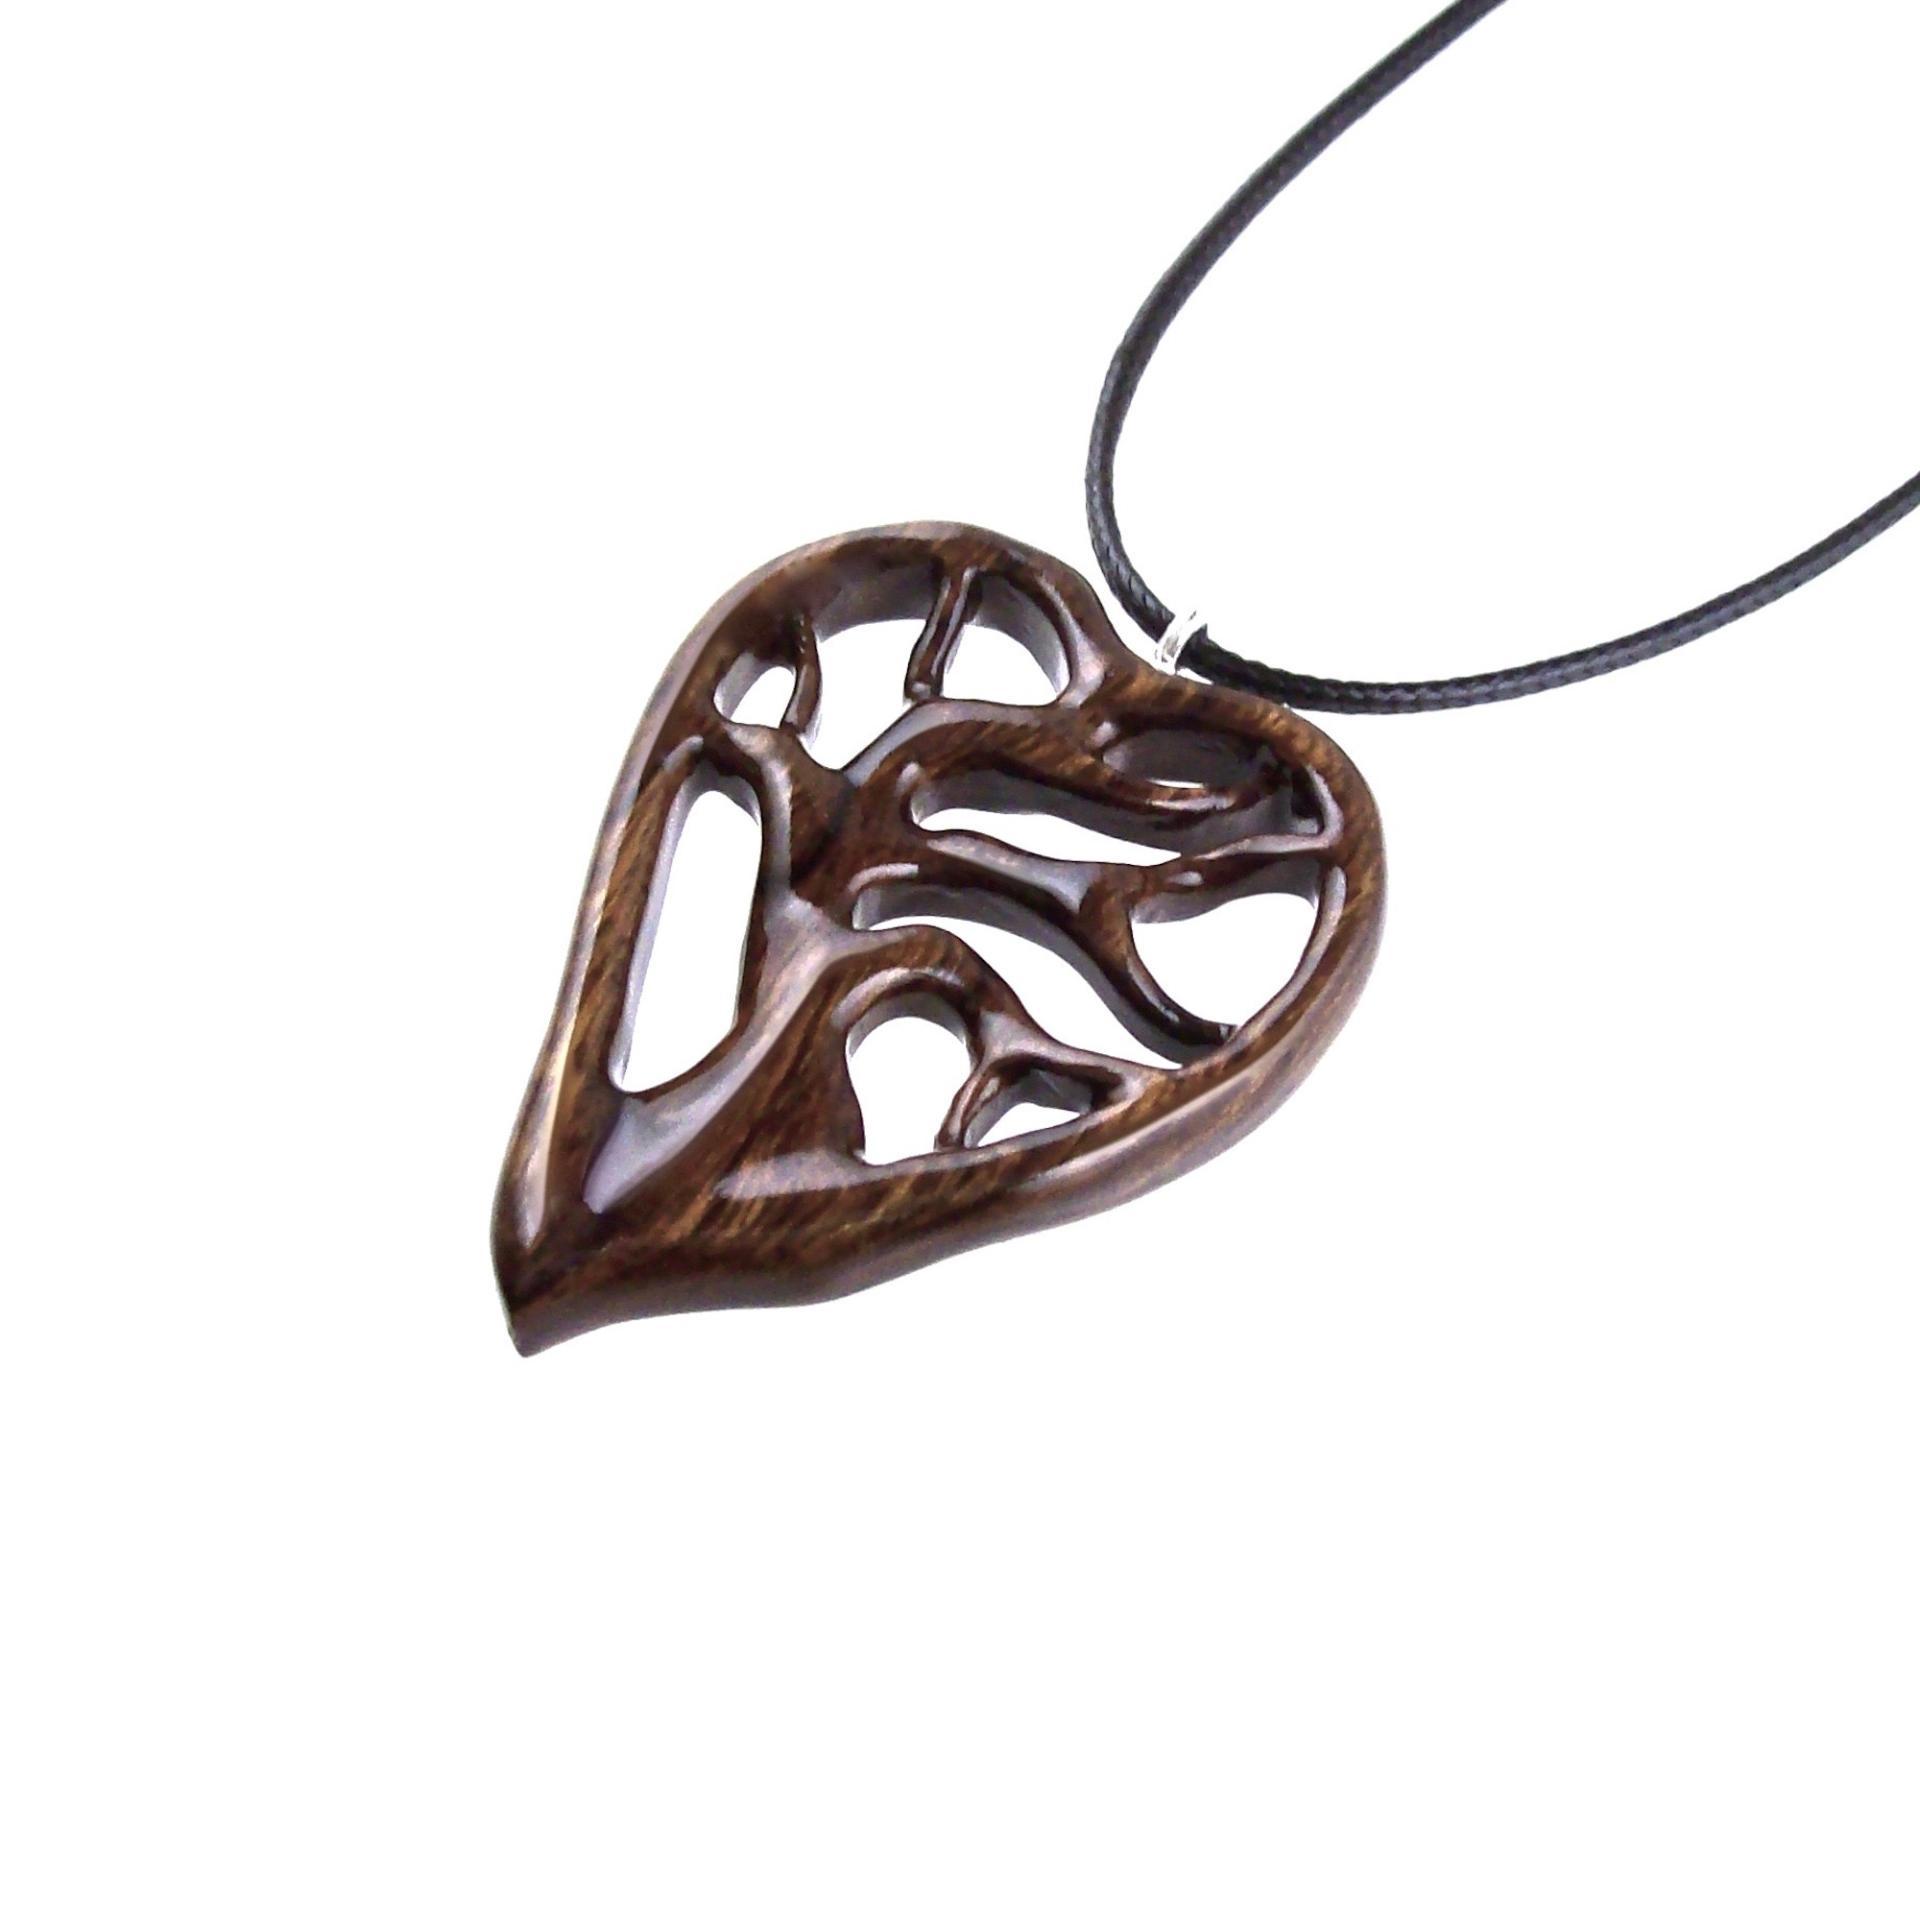 Hand Carved Wood Heart Necklace, Tree of Life Pendant, 5th Anniversary Gift for Her, One of a Kind Handmade Wooden Jewelry